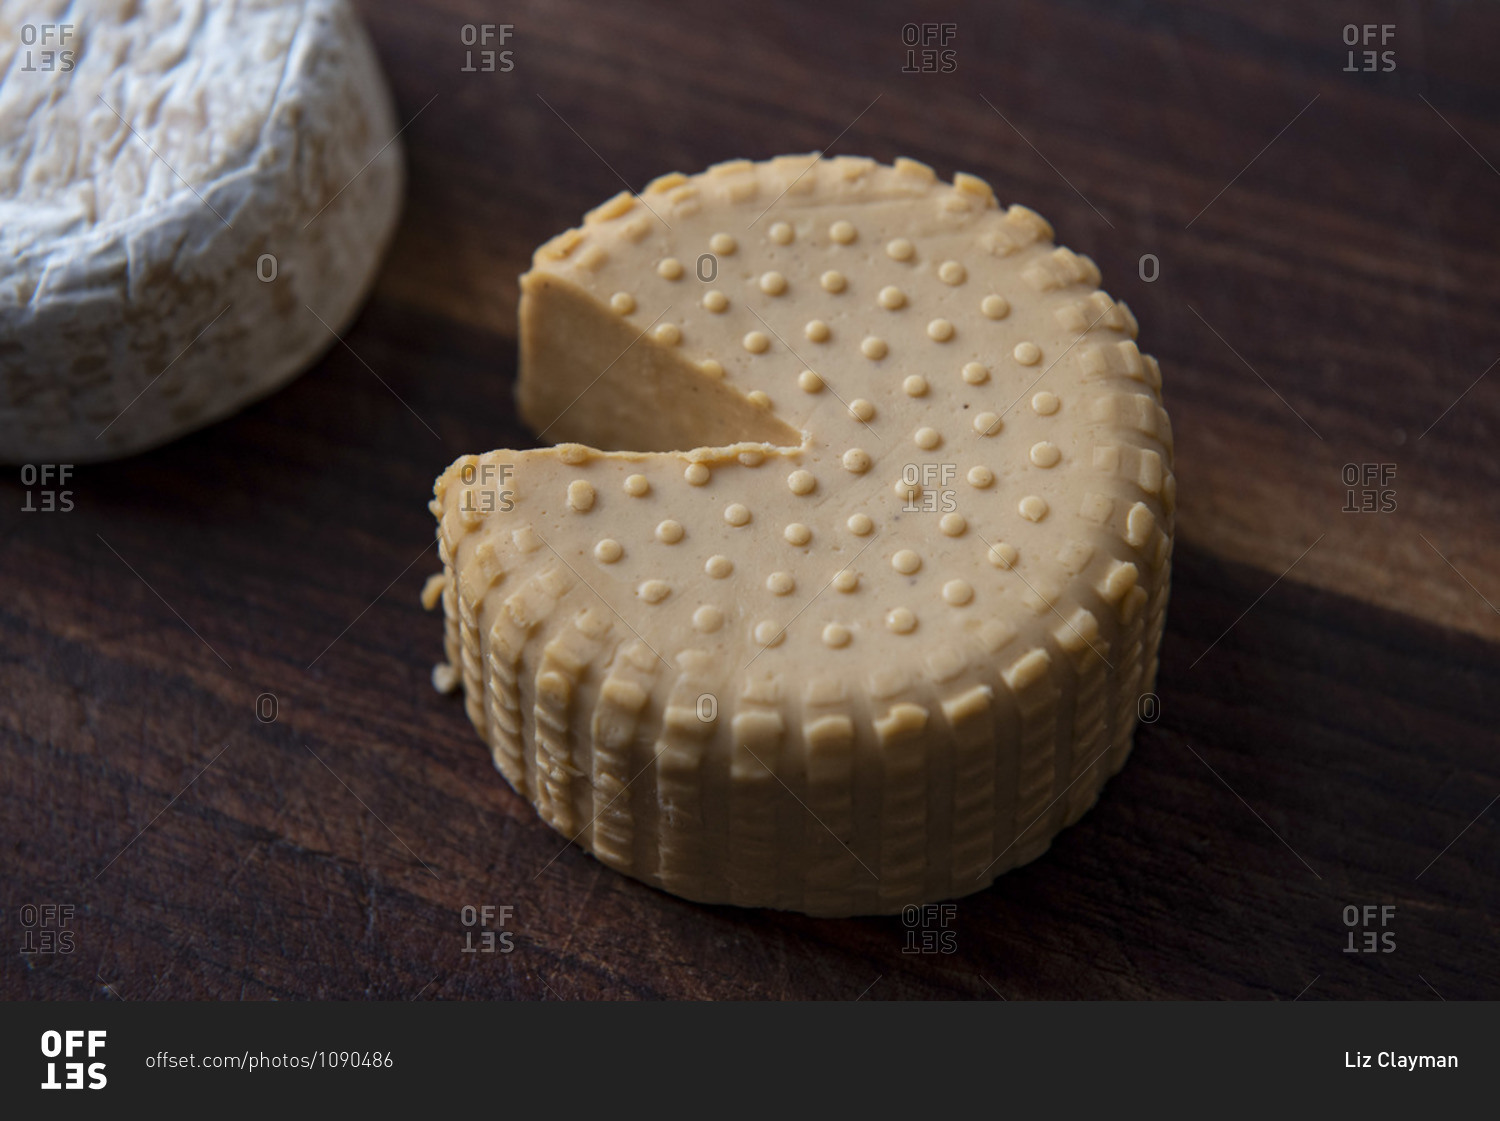 Top view of two plant based, dairy free cheeses on wooden board